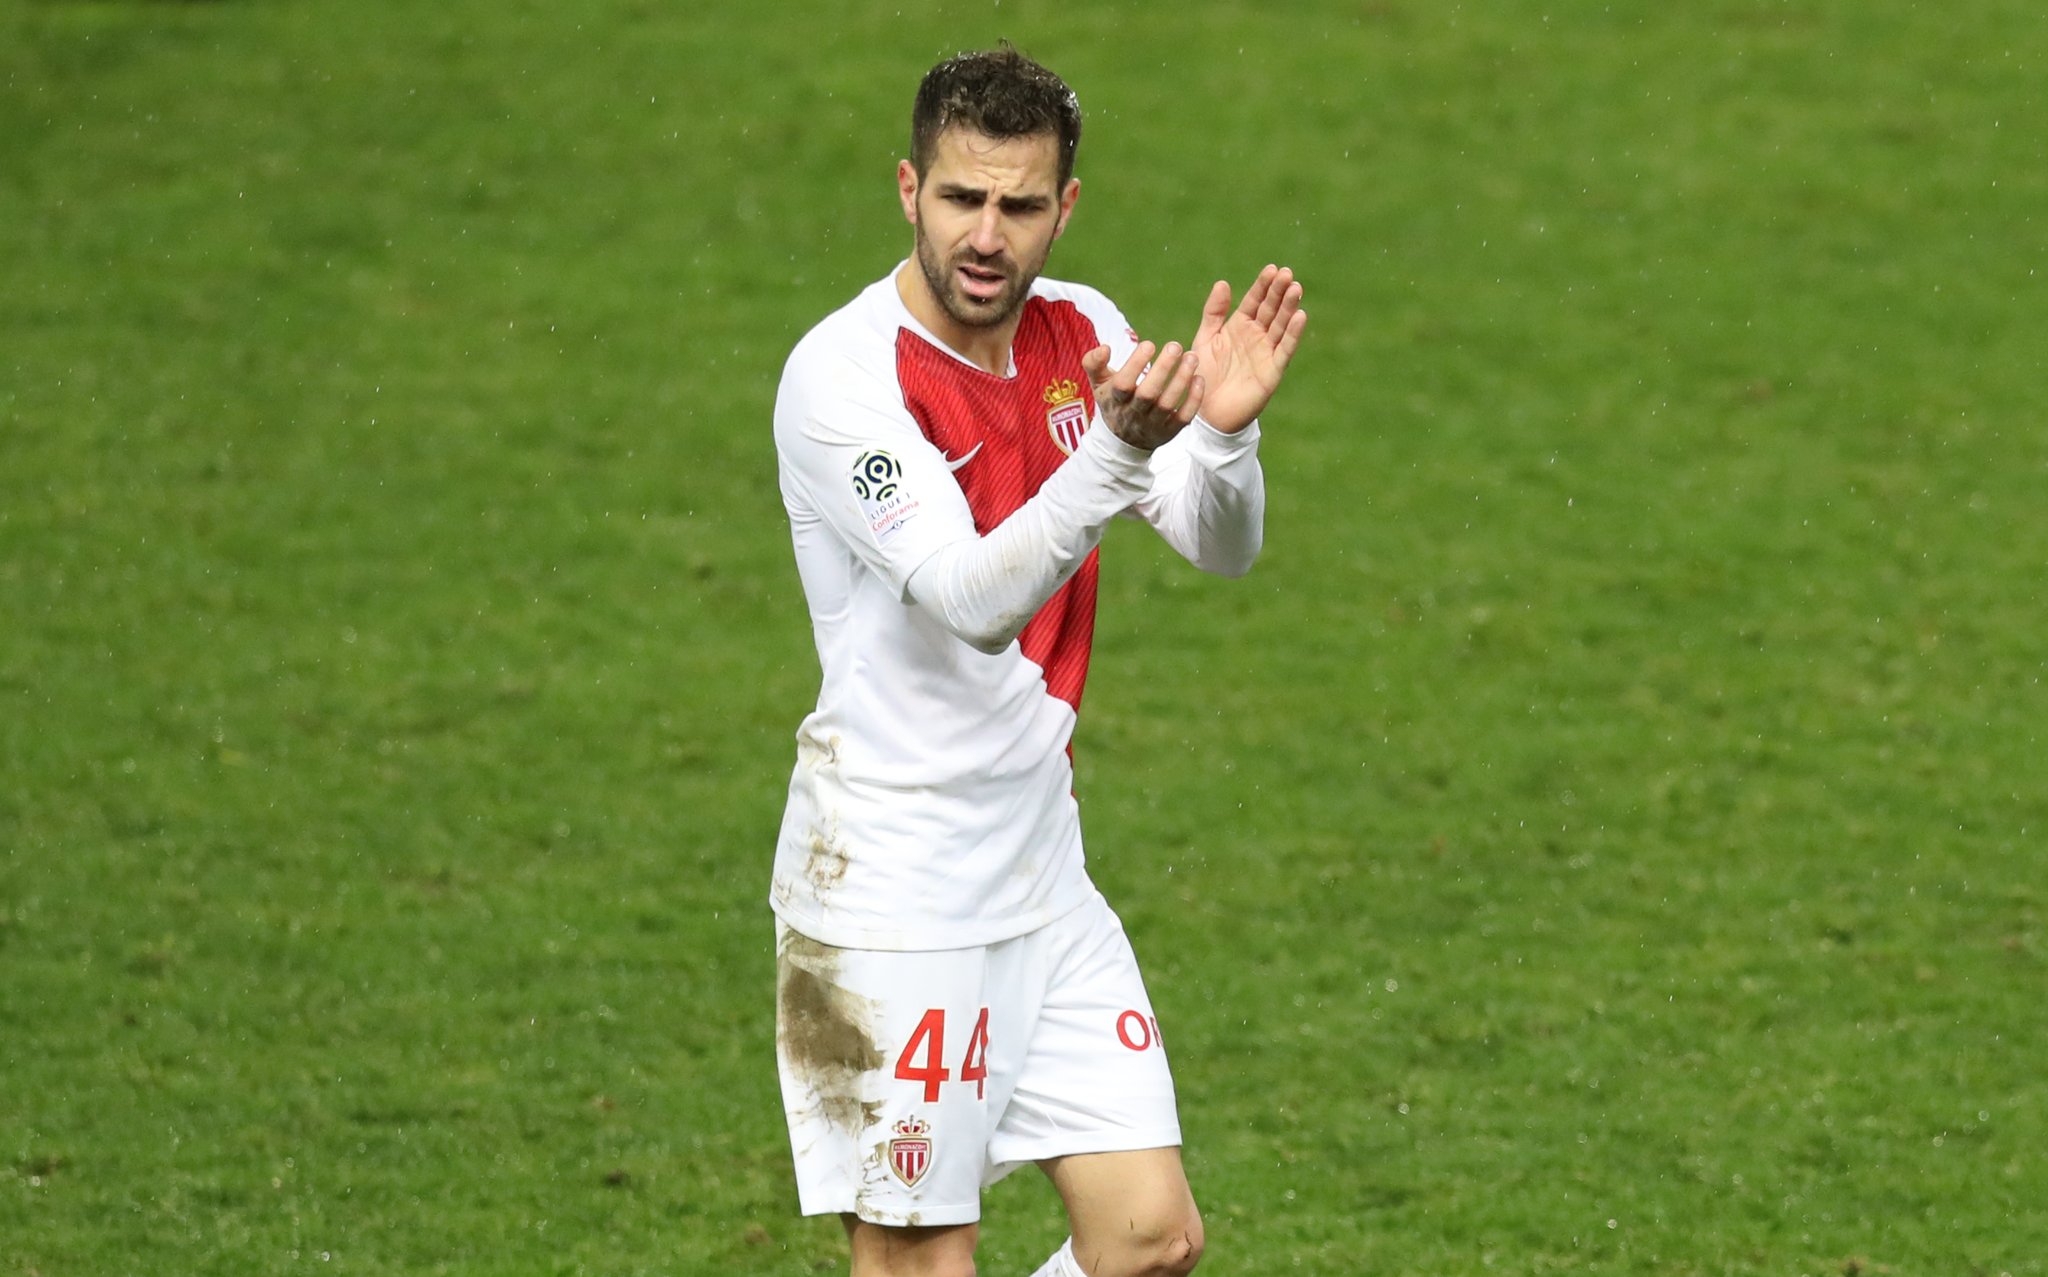 Ligue 1 ended their season too soon especially with others trying to restart, admits Cesc Fabregas